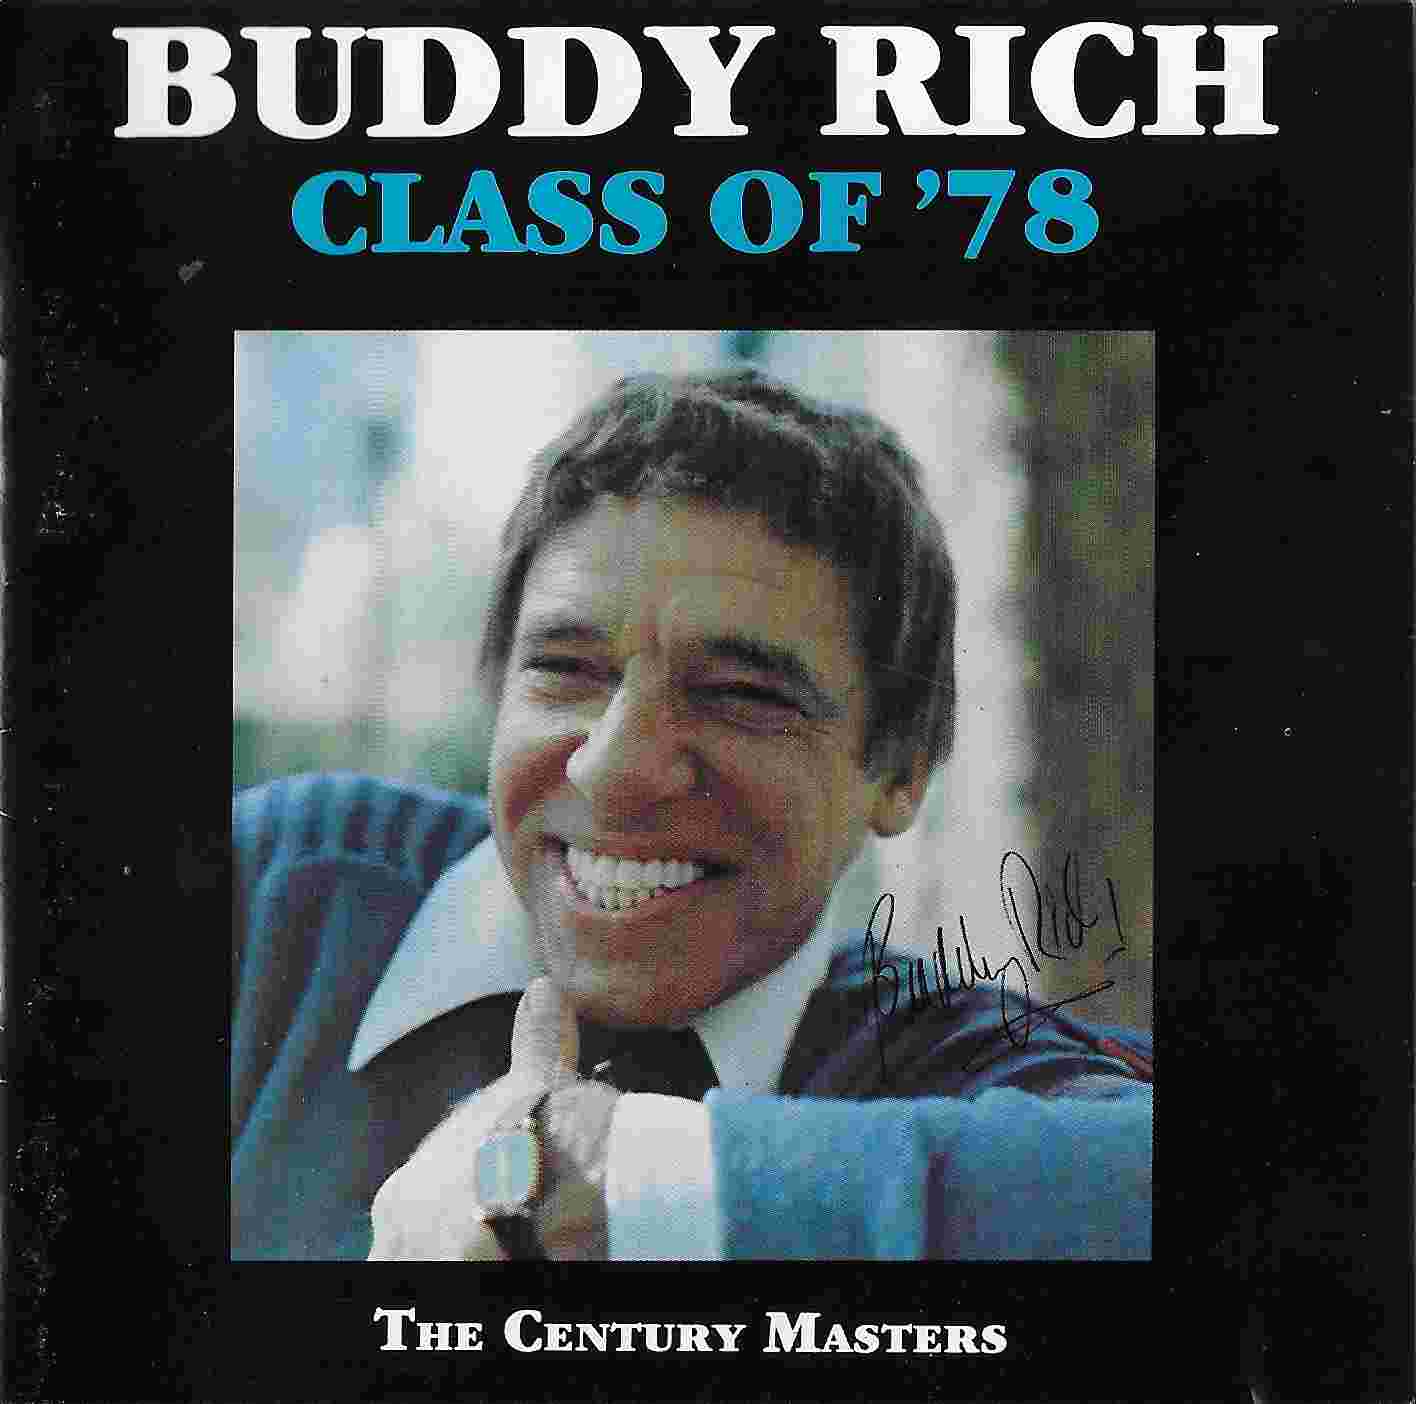 Picture of The Century Catalogue - Buddy Rich class of 78 by artist The Buddy Rich Big Band from the BBC cds - Records and Tapes library